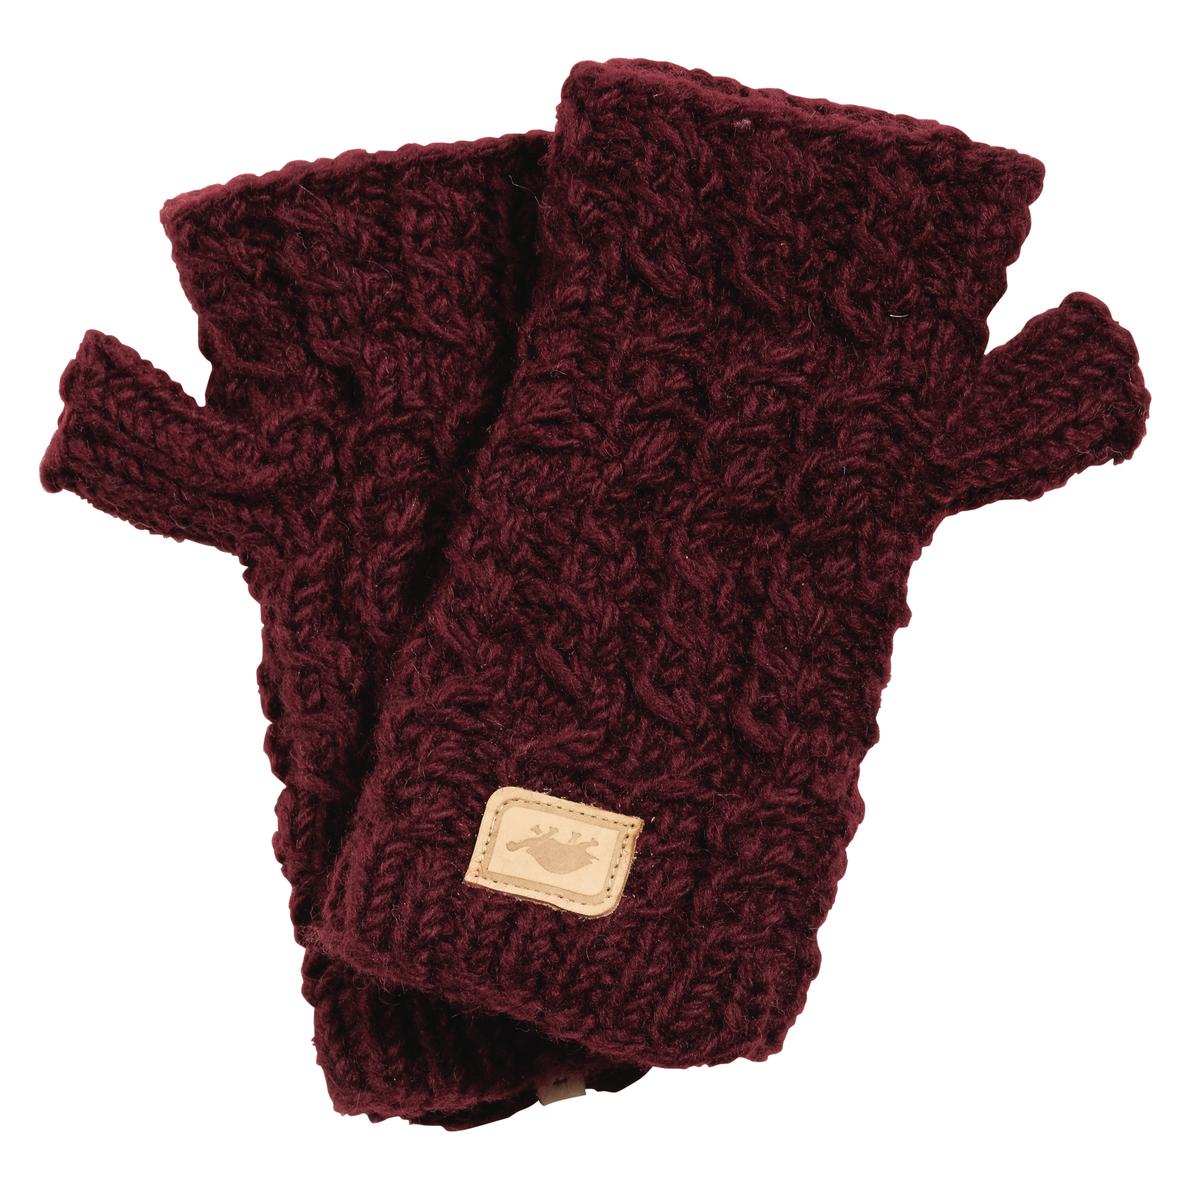 Turtle Fur Mika Wool Fingerless Mittens - Nepal Collection Bordeaux